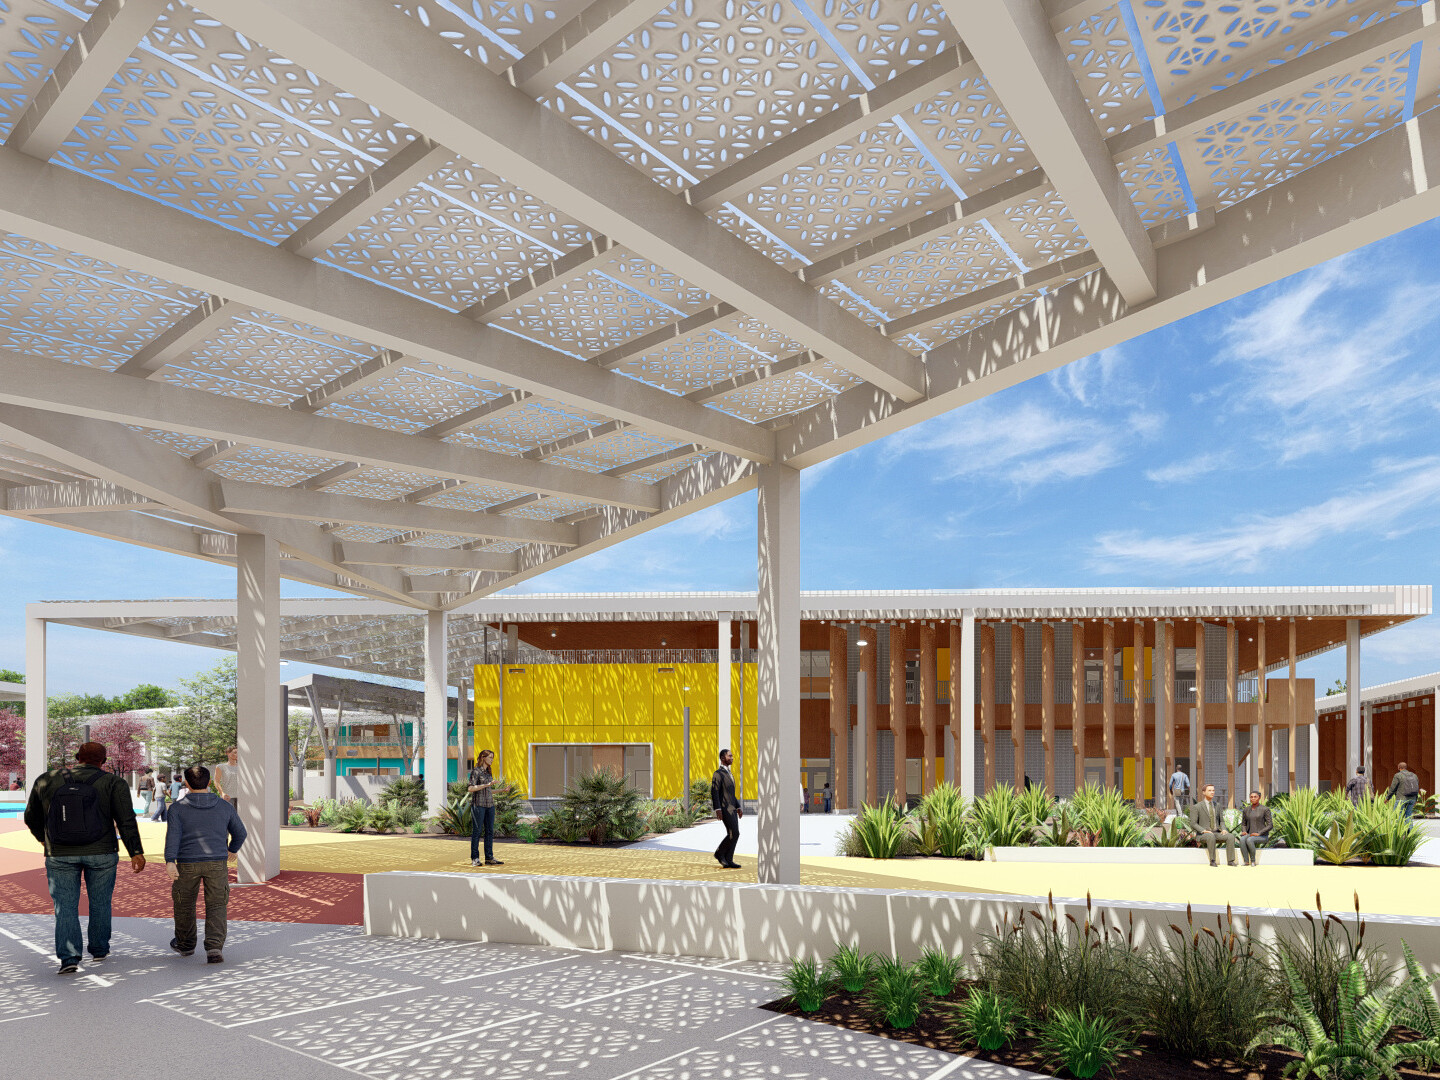 U.S. Virgin Islands Department of Education campus rendering. Courtyard with perforated sun canopies, yellow building opposite